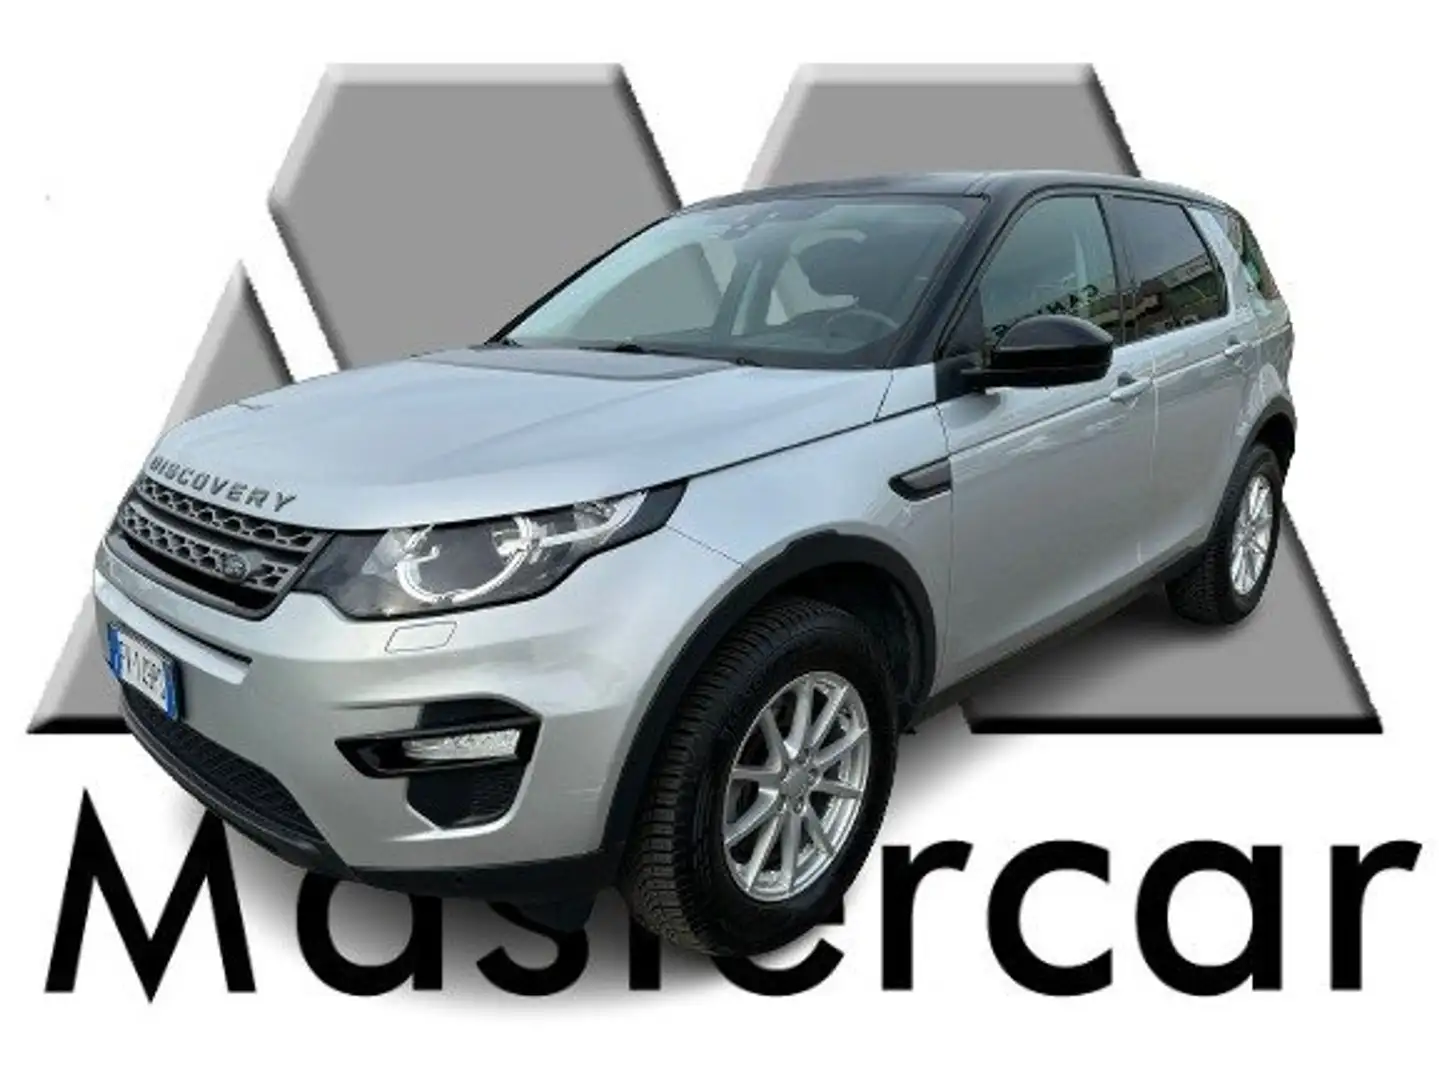 Land Rover Discovery Sport 2.0 Pure 150cv - Manuale - Fatturabile - FV149PS Argento - 1